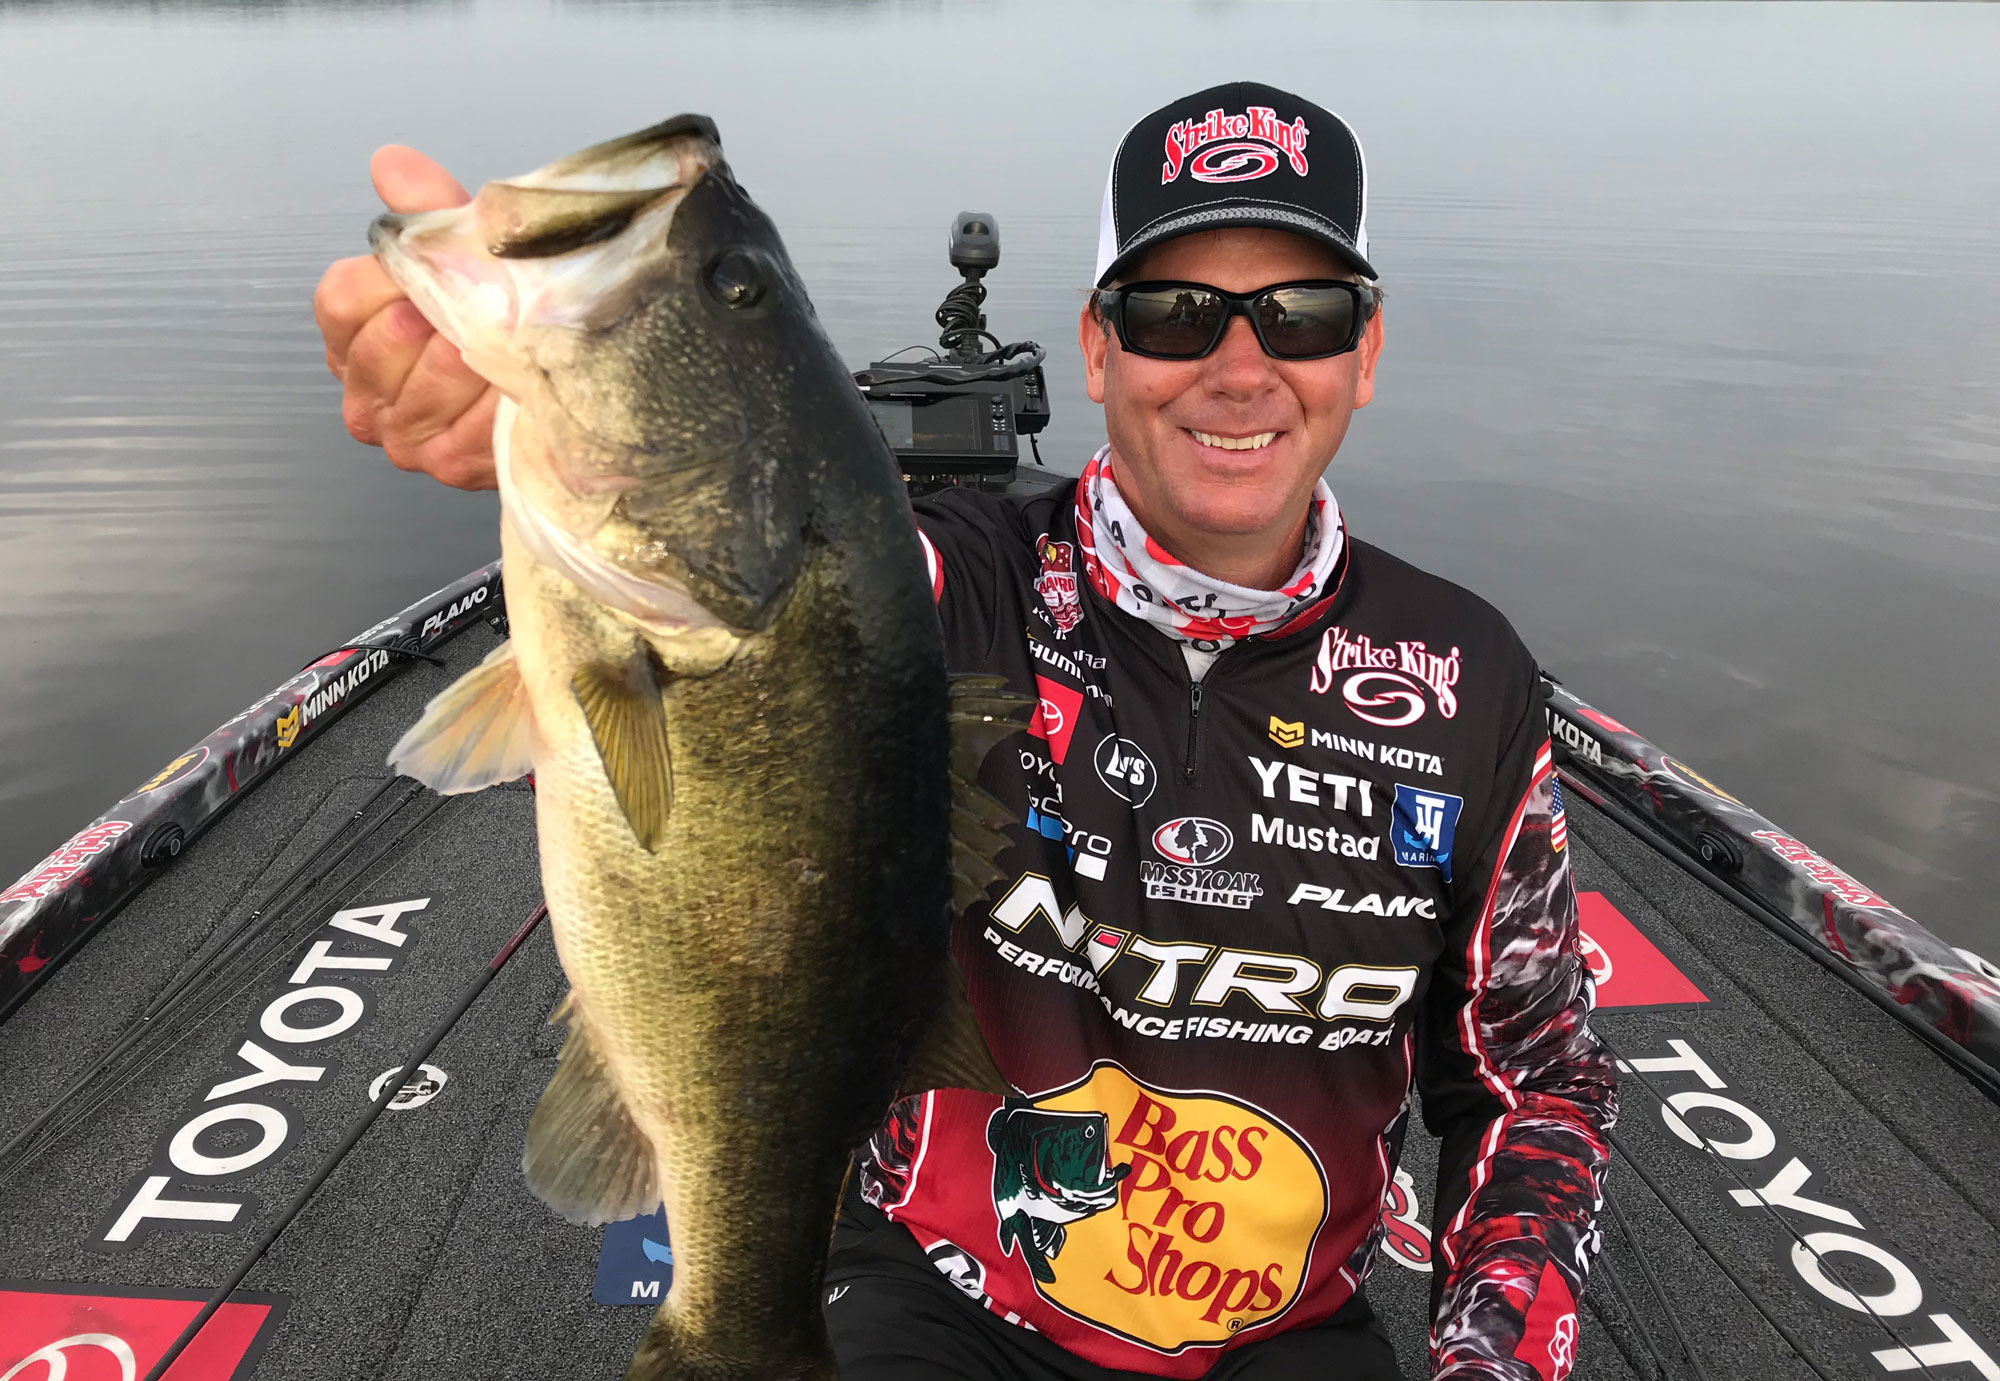 The Good Life According to Kevin VanDam - Modern Wellness Guide